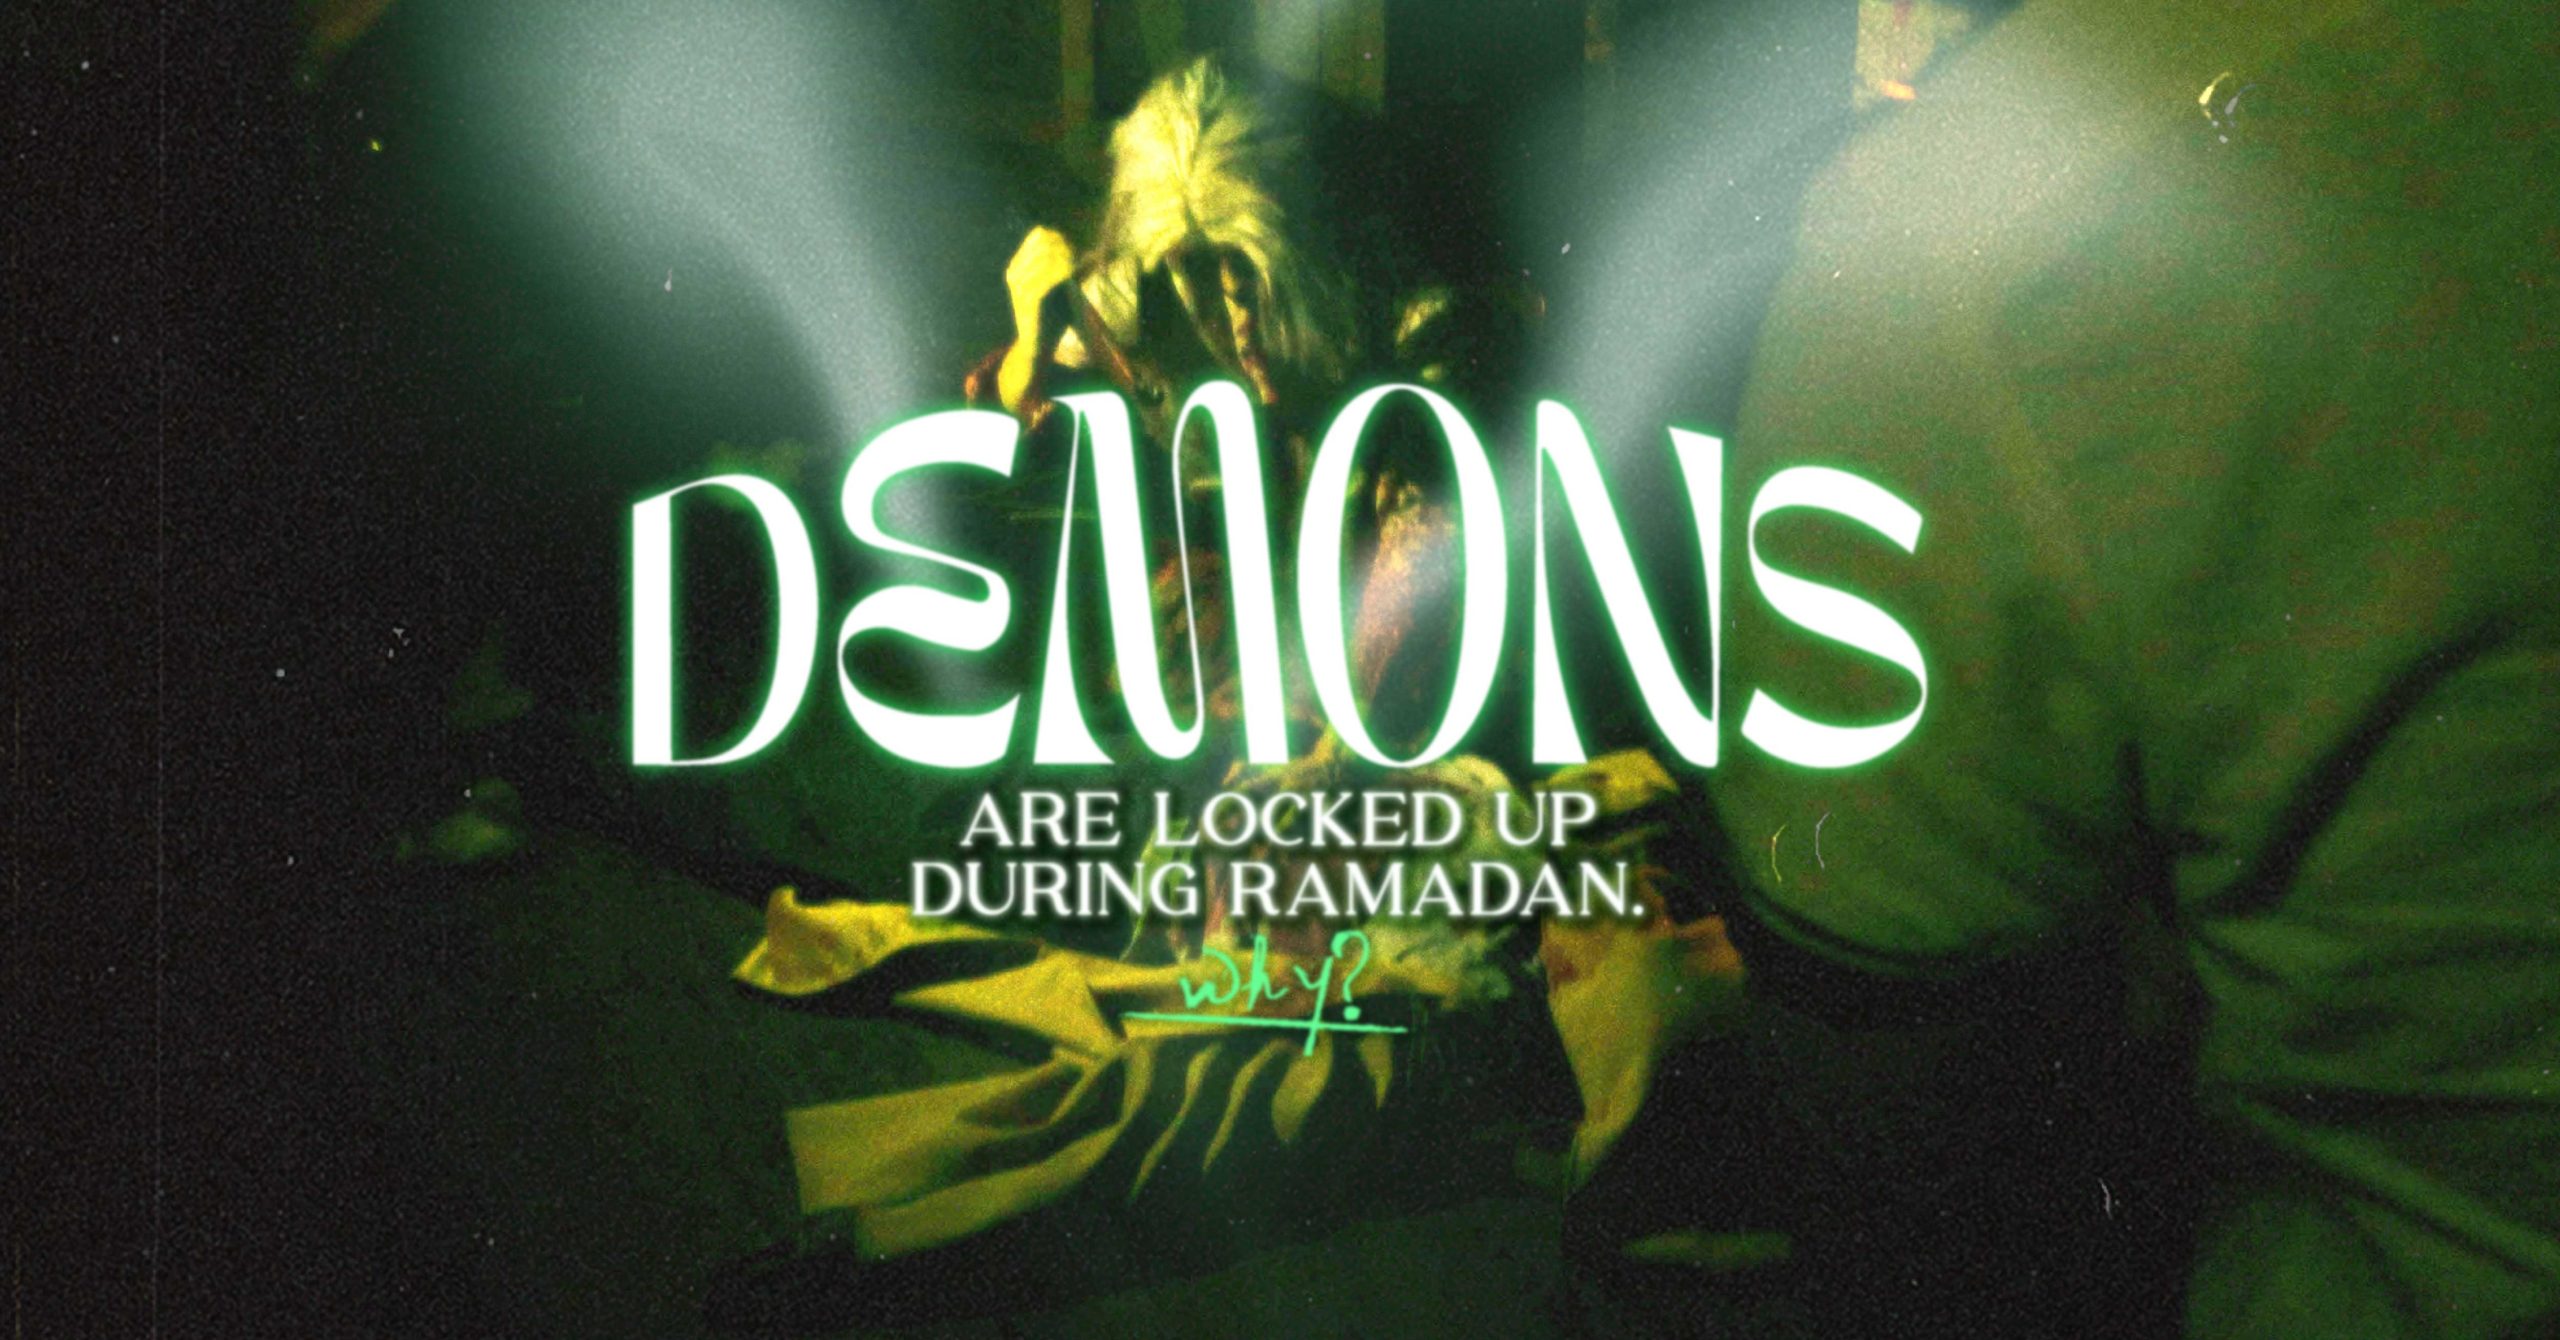 Ghost and Demons are locked up during Ramadan. Why?